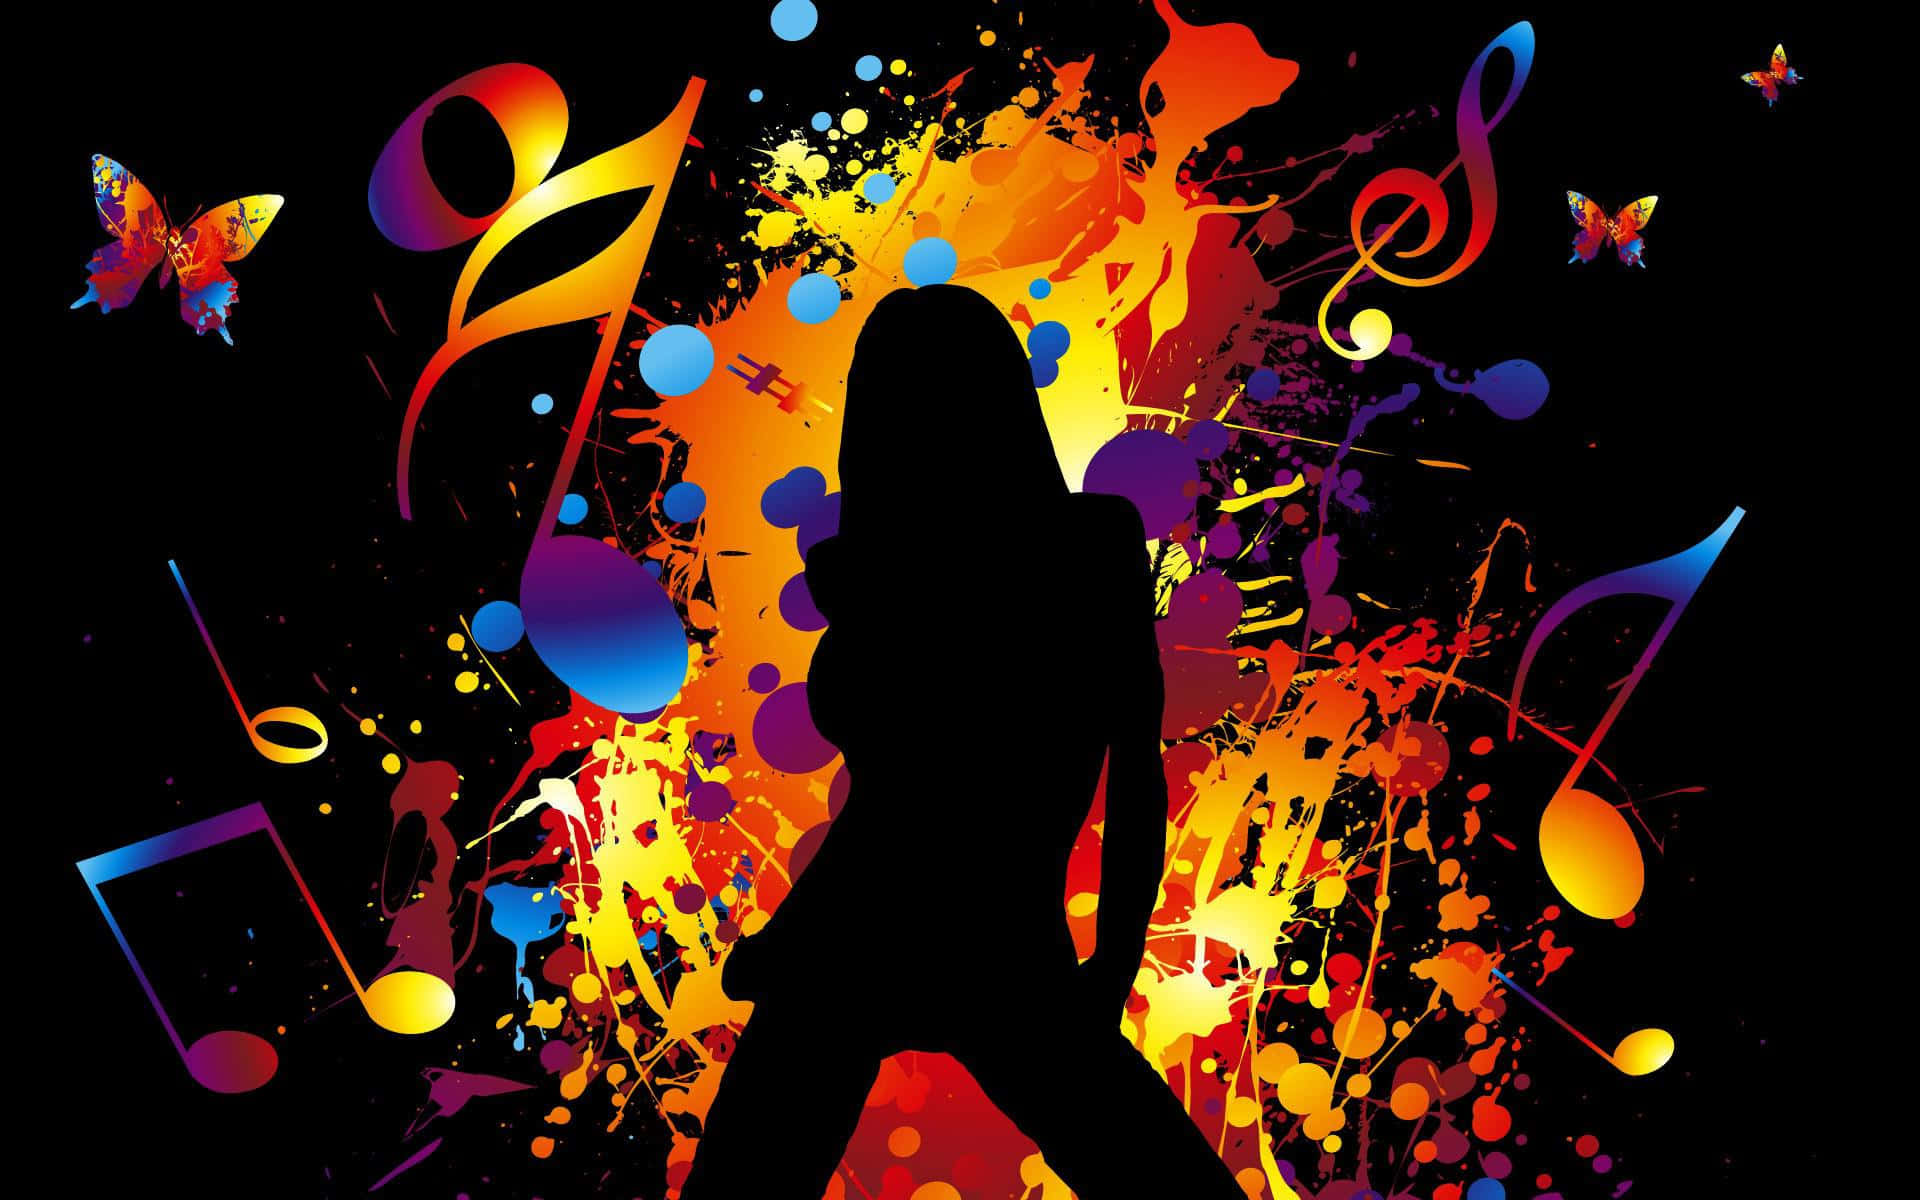 Pop Music is a vibrant sound that energizes us all. Wallpaper